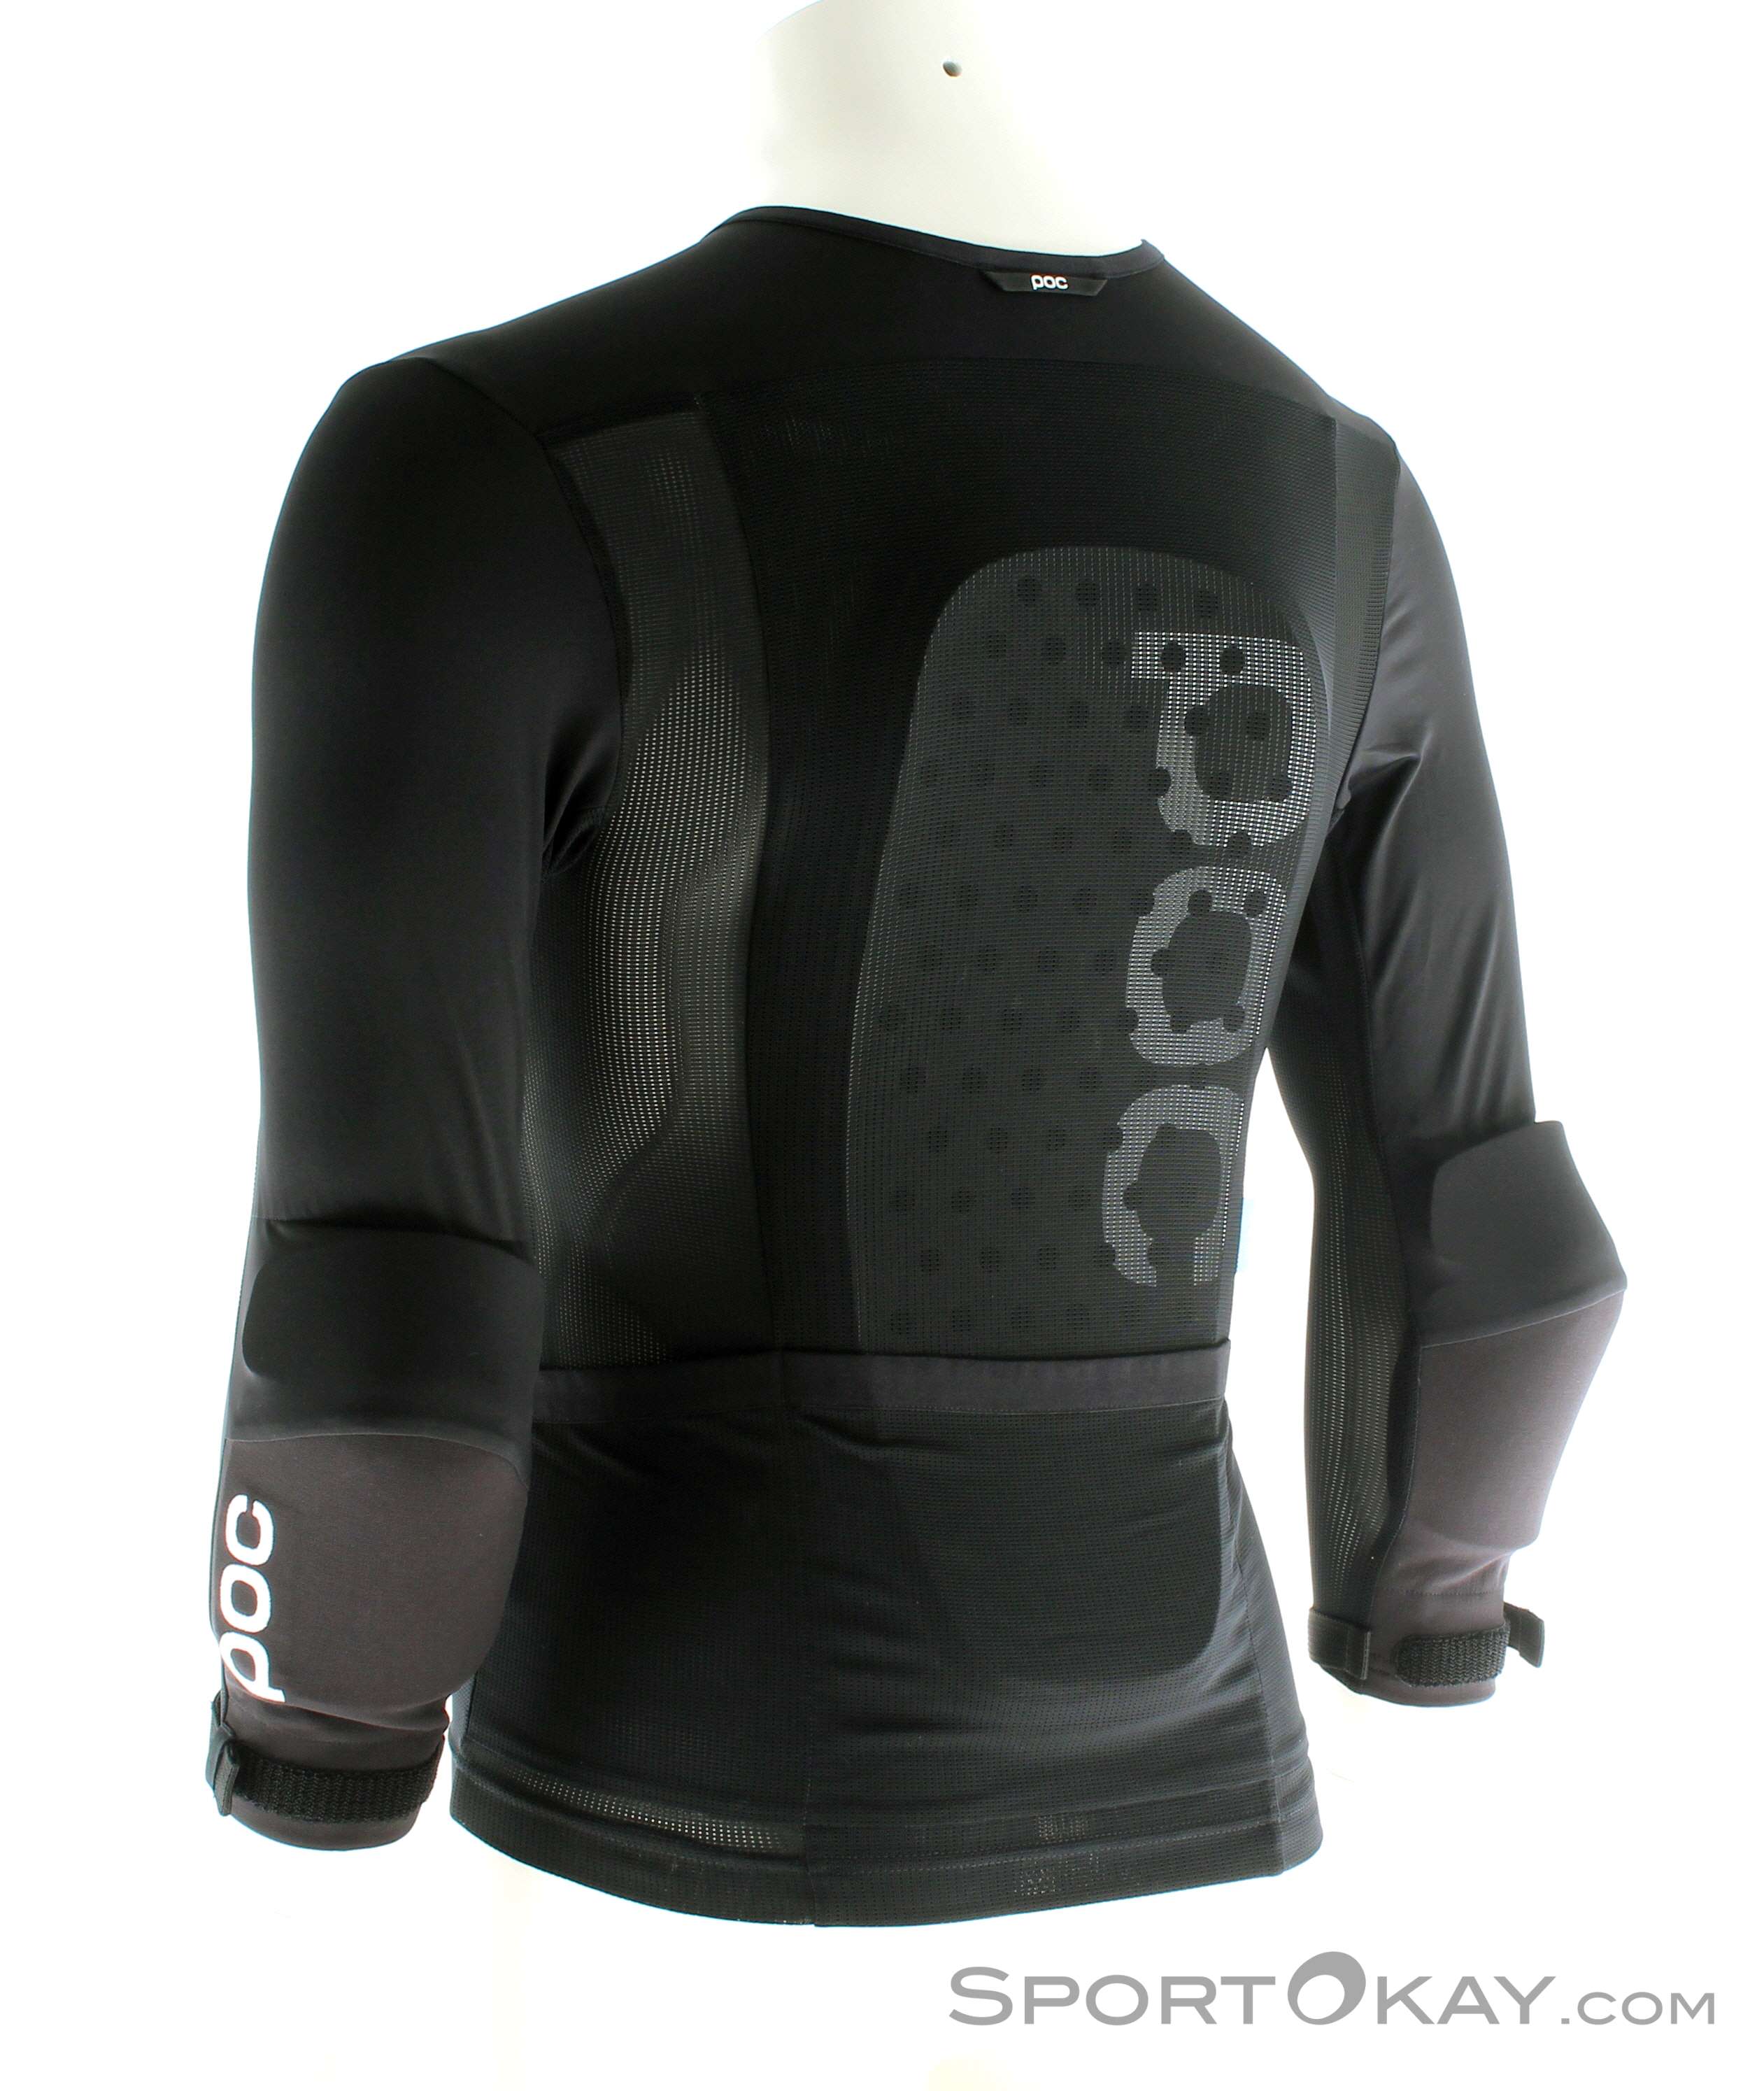 VPD Air Tee with Back Protector POC Mountain Biking Armor for Men and Women 